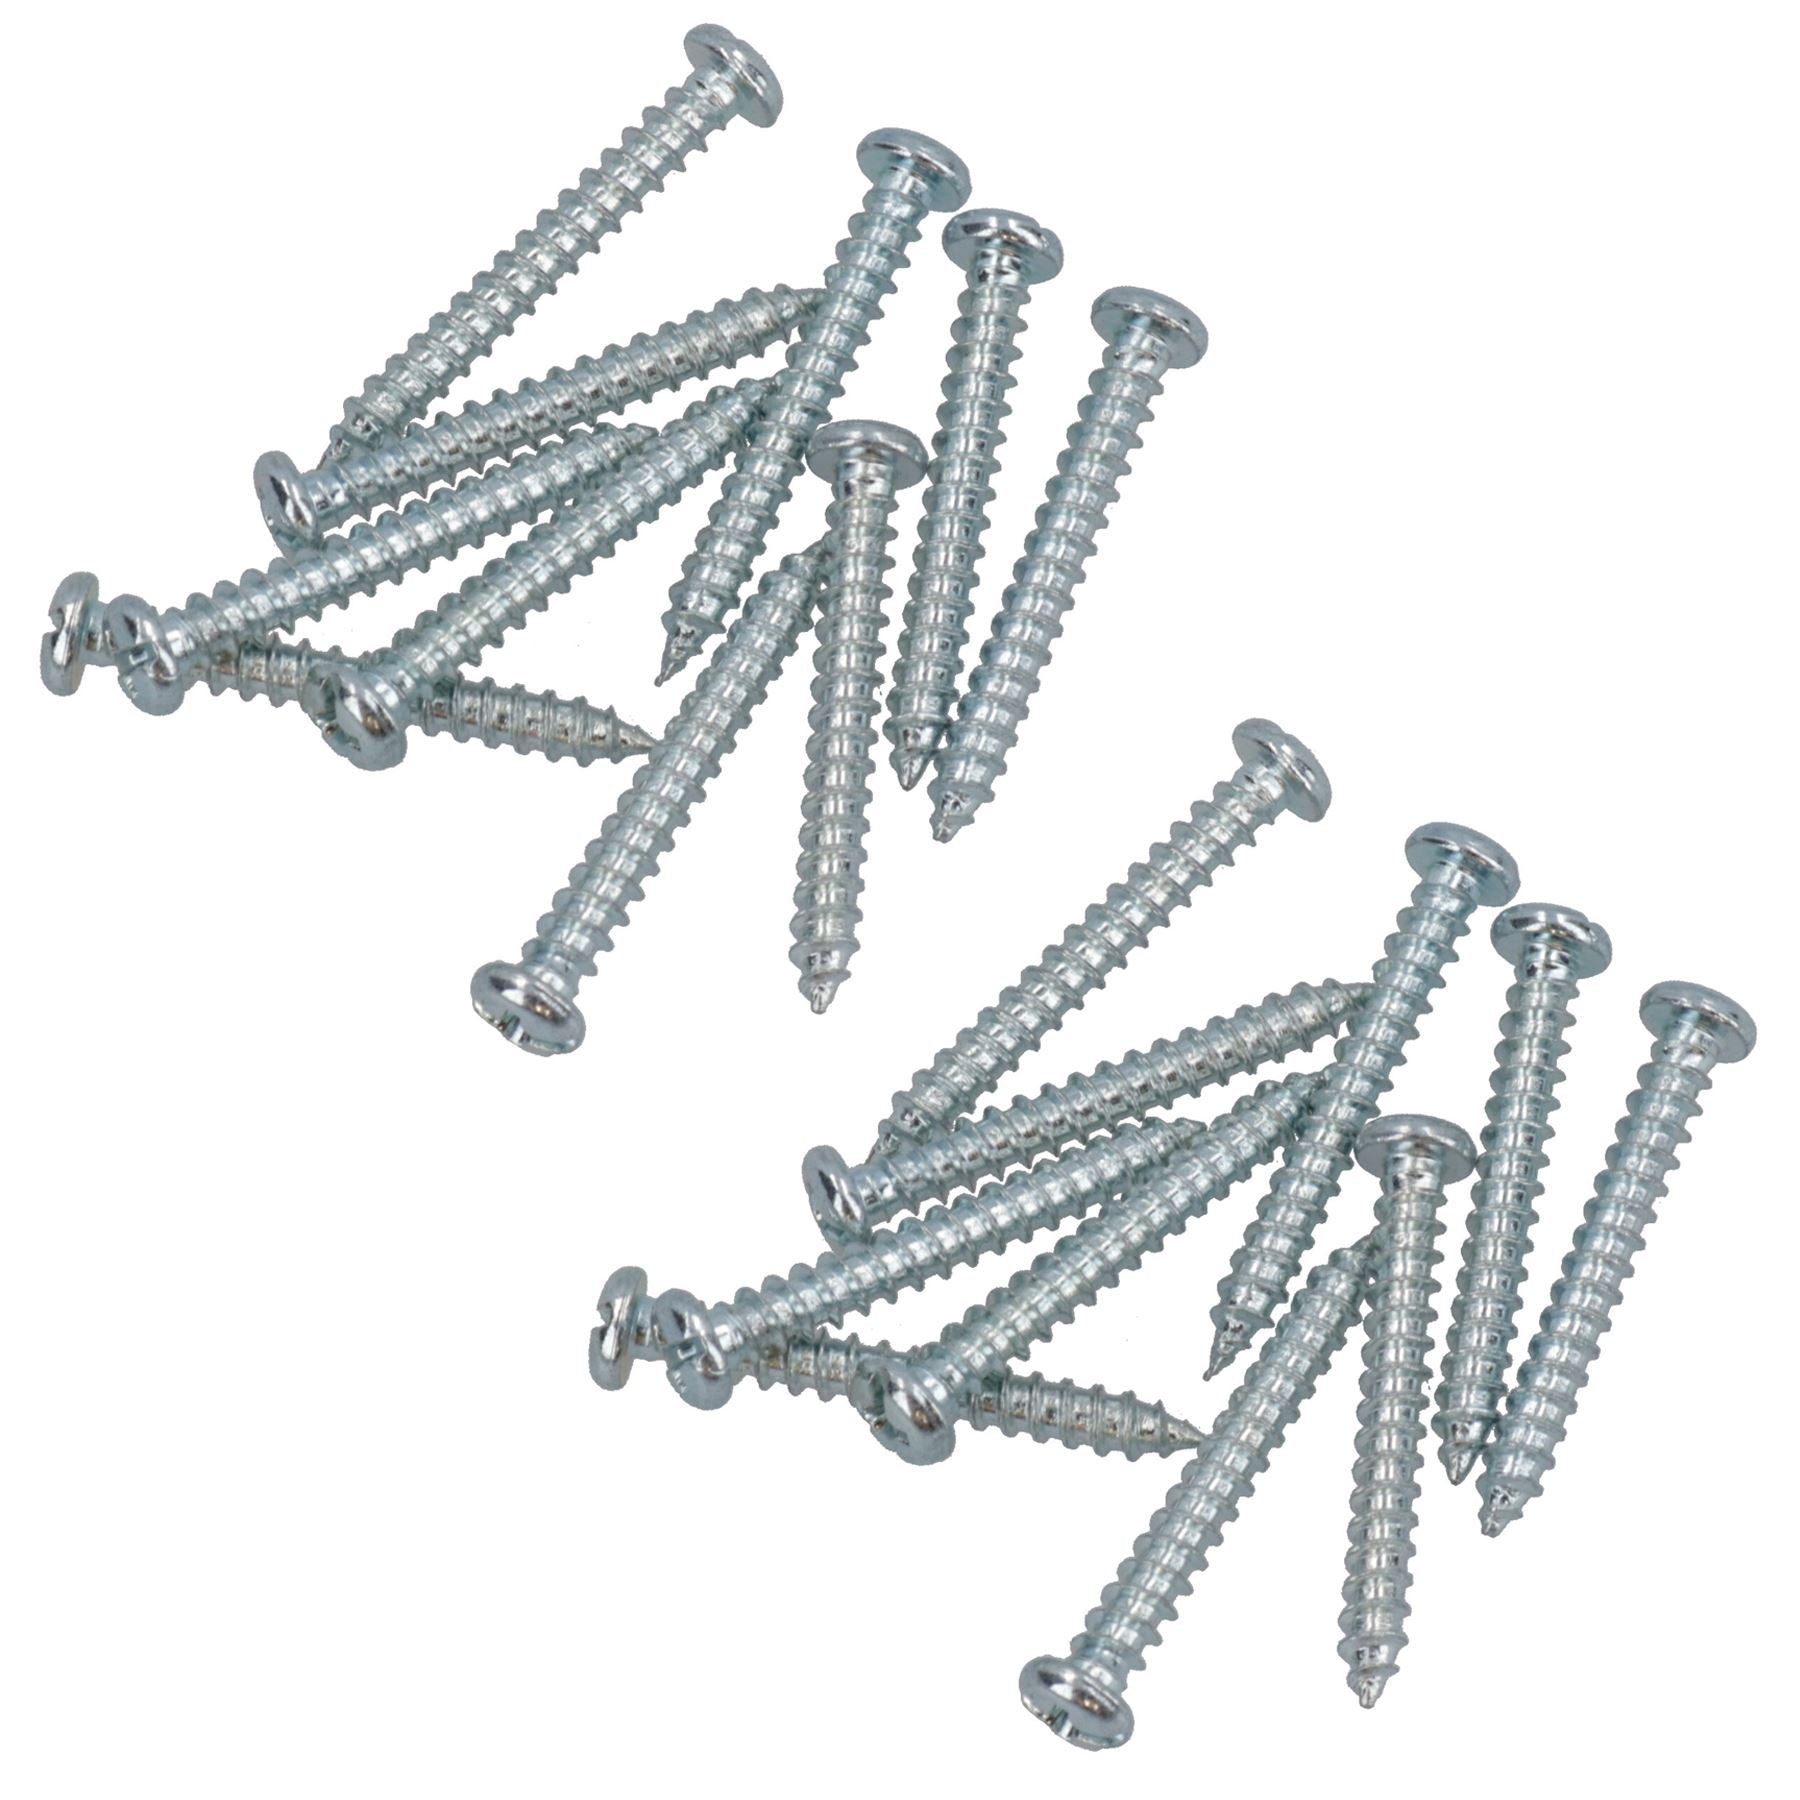 Self Tapping Screws PH2 Drive 5mm (width) x 38mm (length) Fasteners